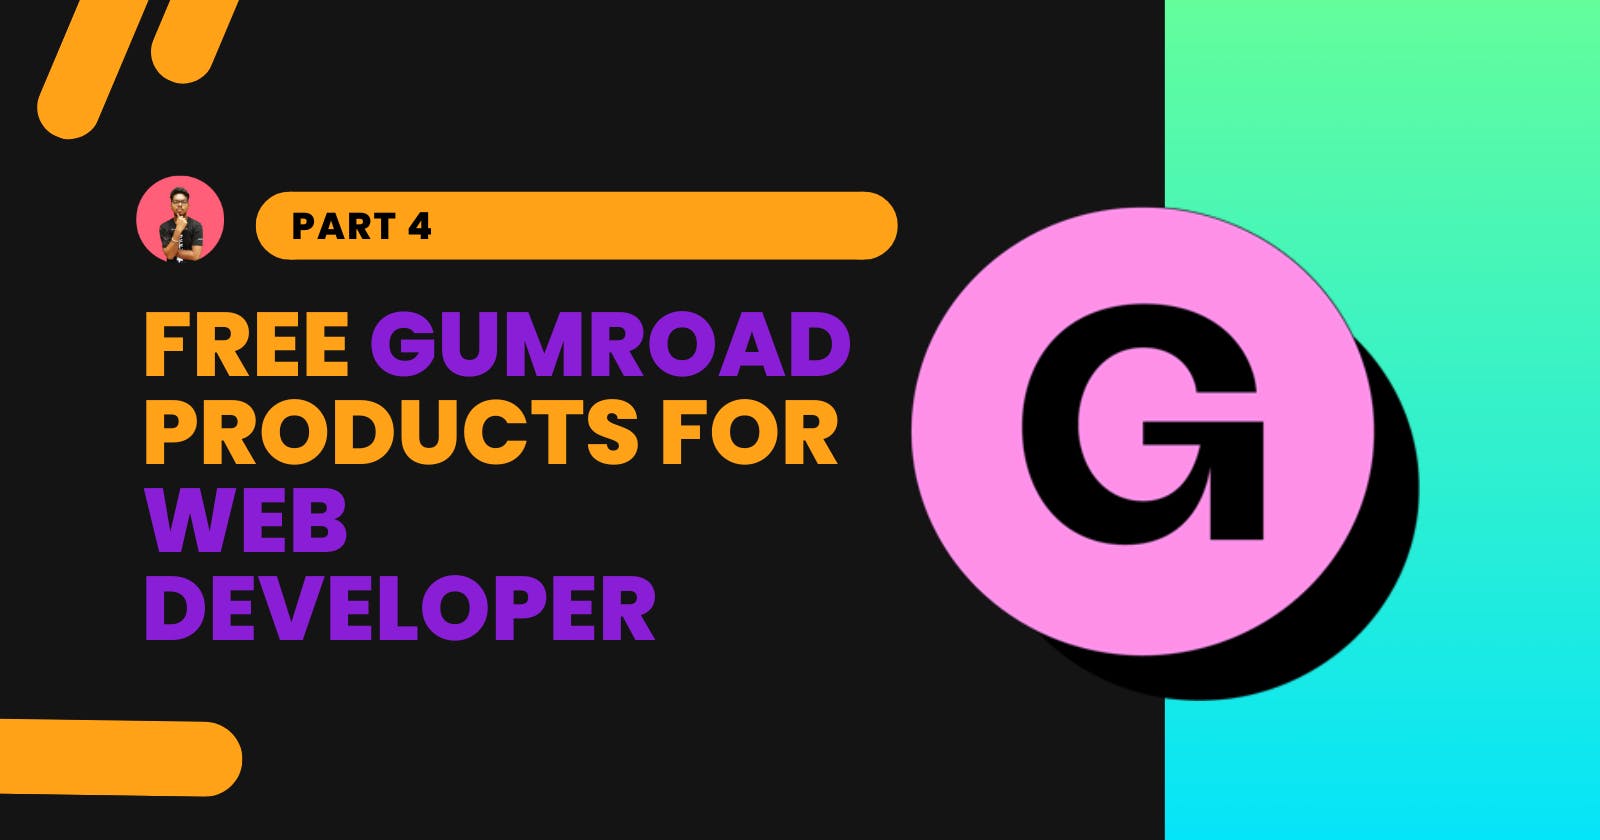 10 Free GumRoad products for Web Developers